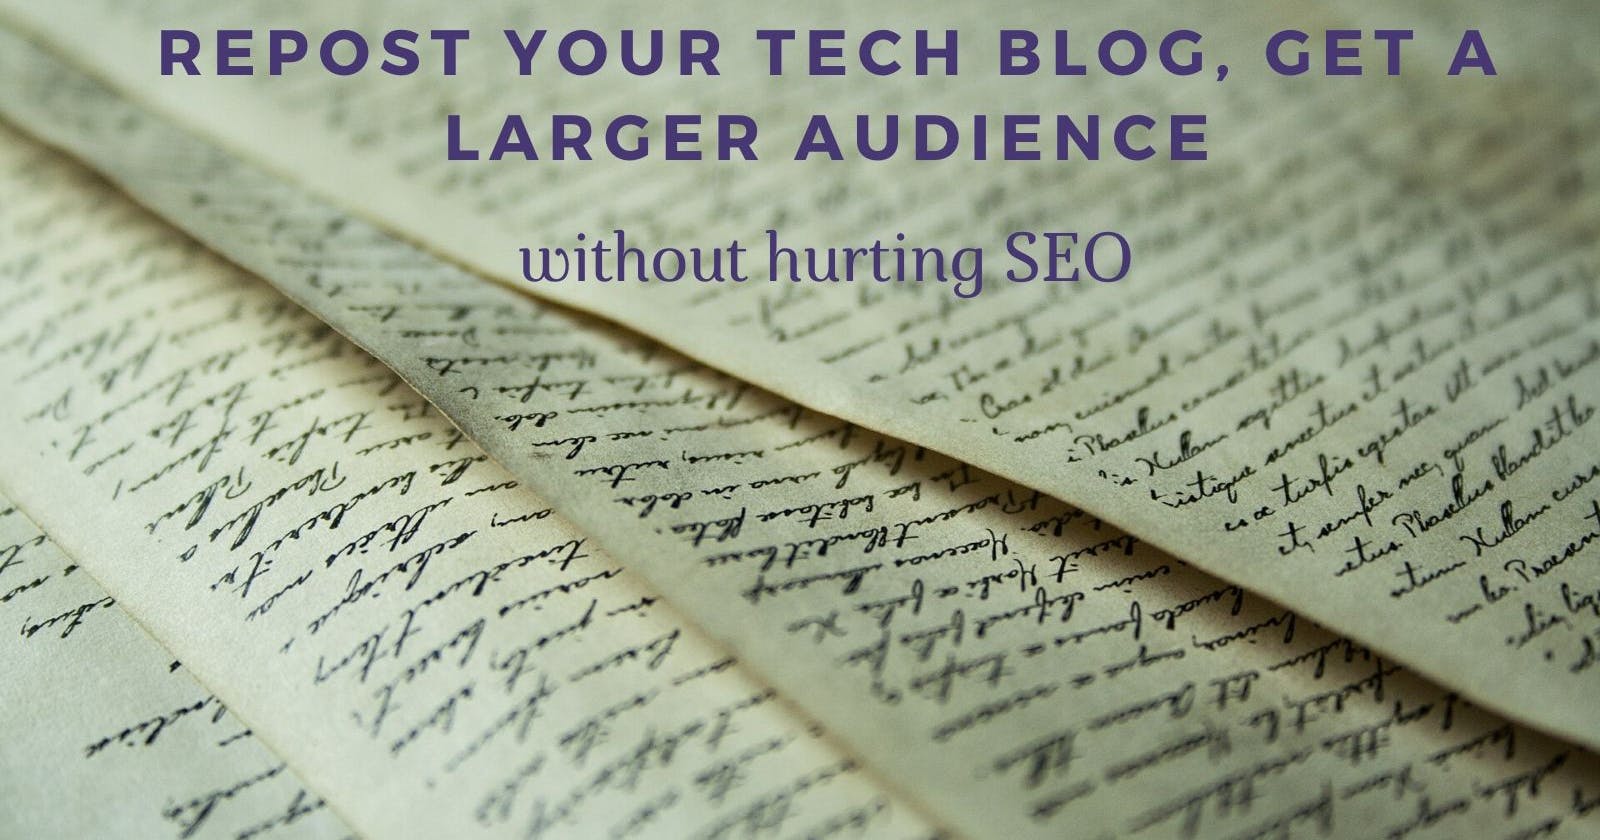 Repost your tech blog, get a larger audience without hurting SEO